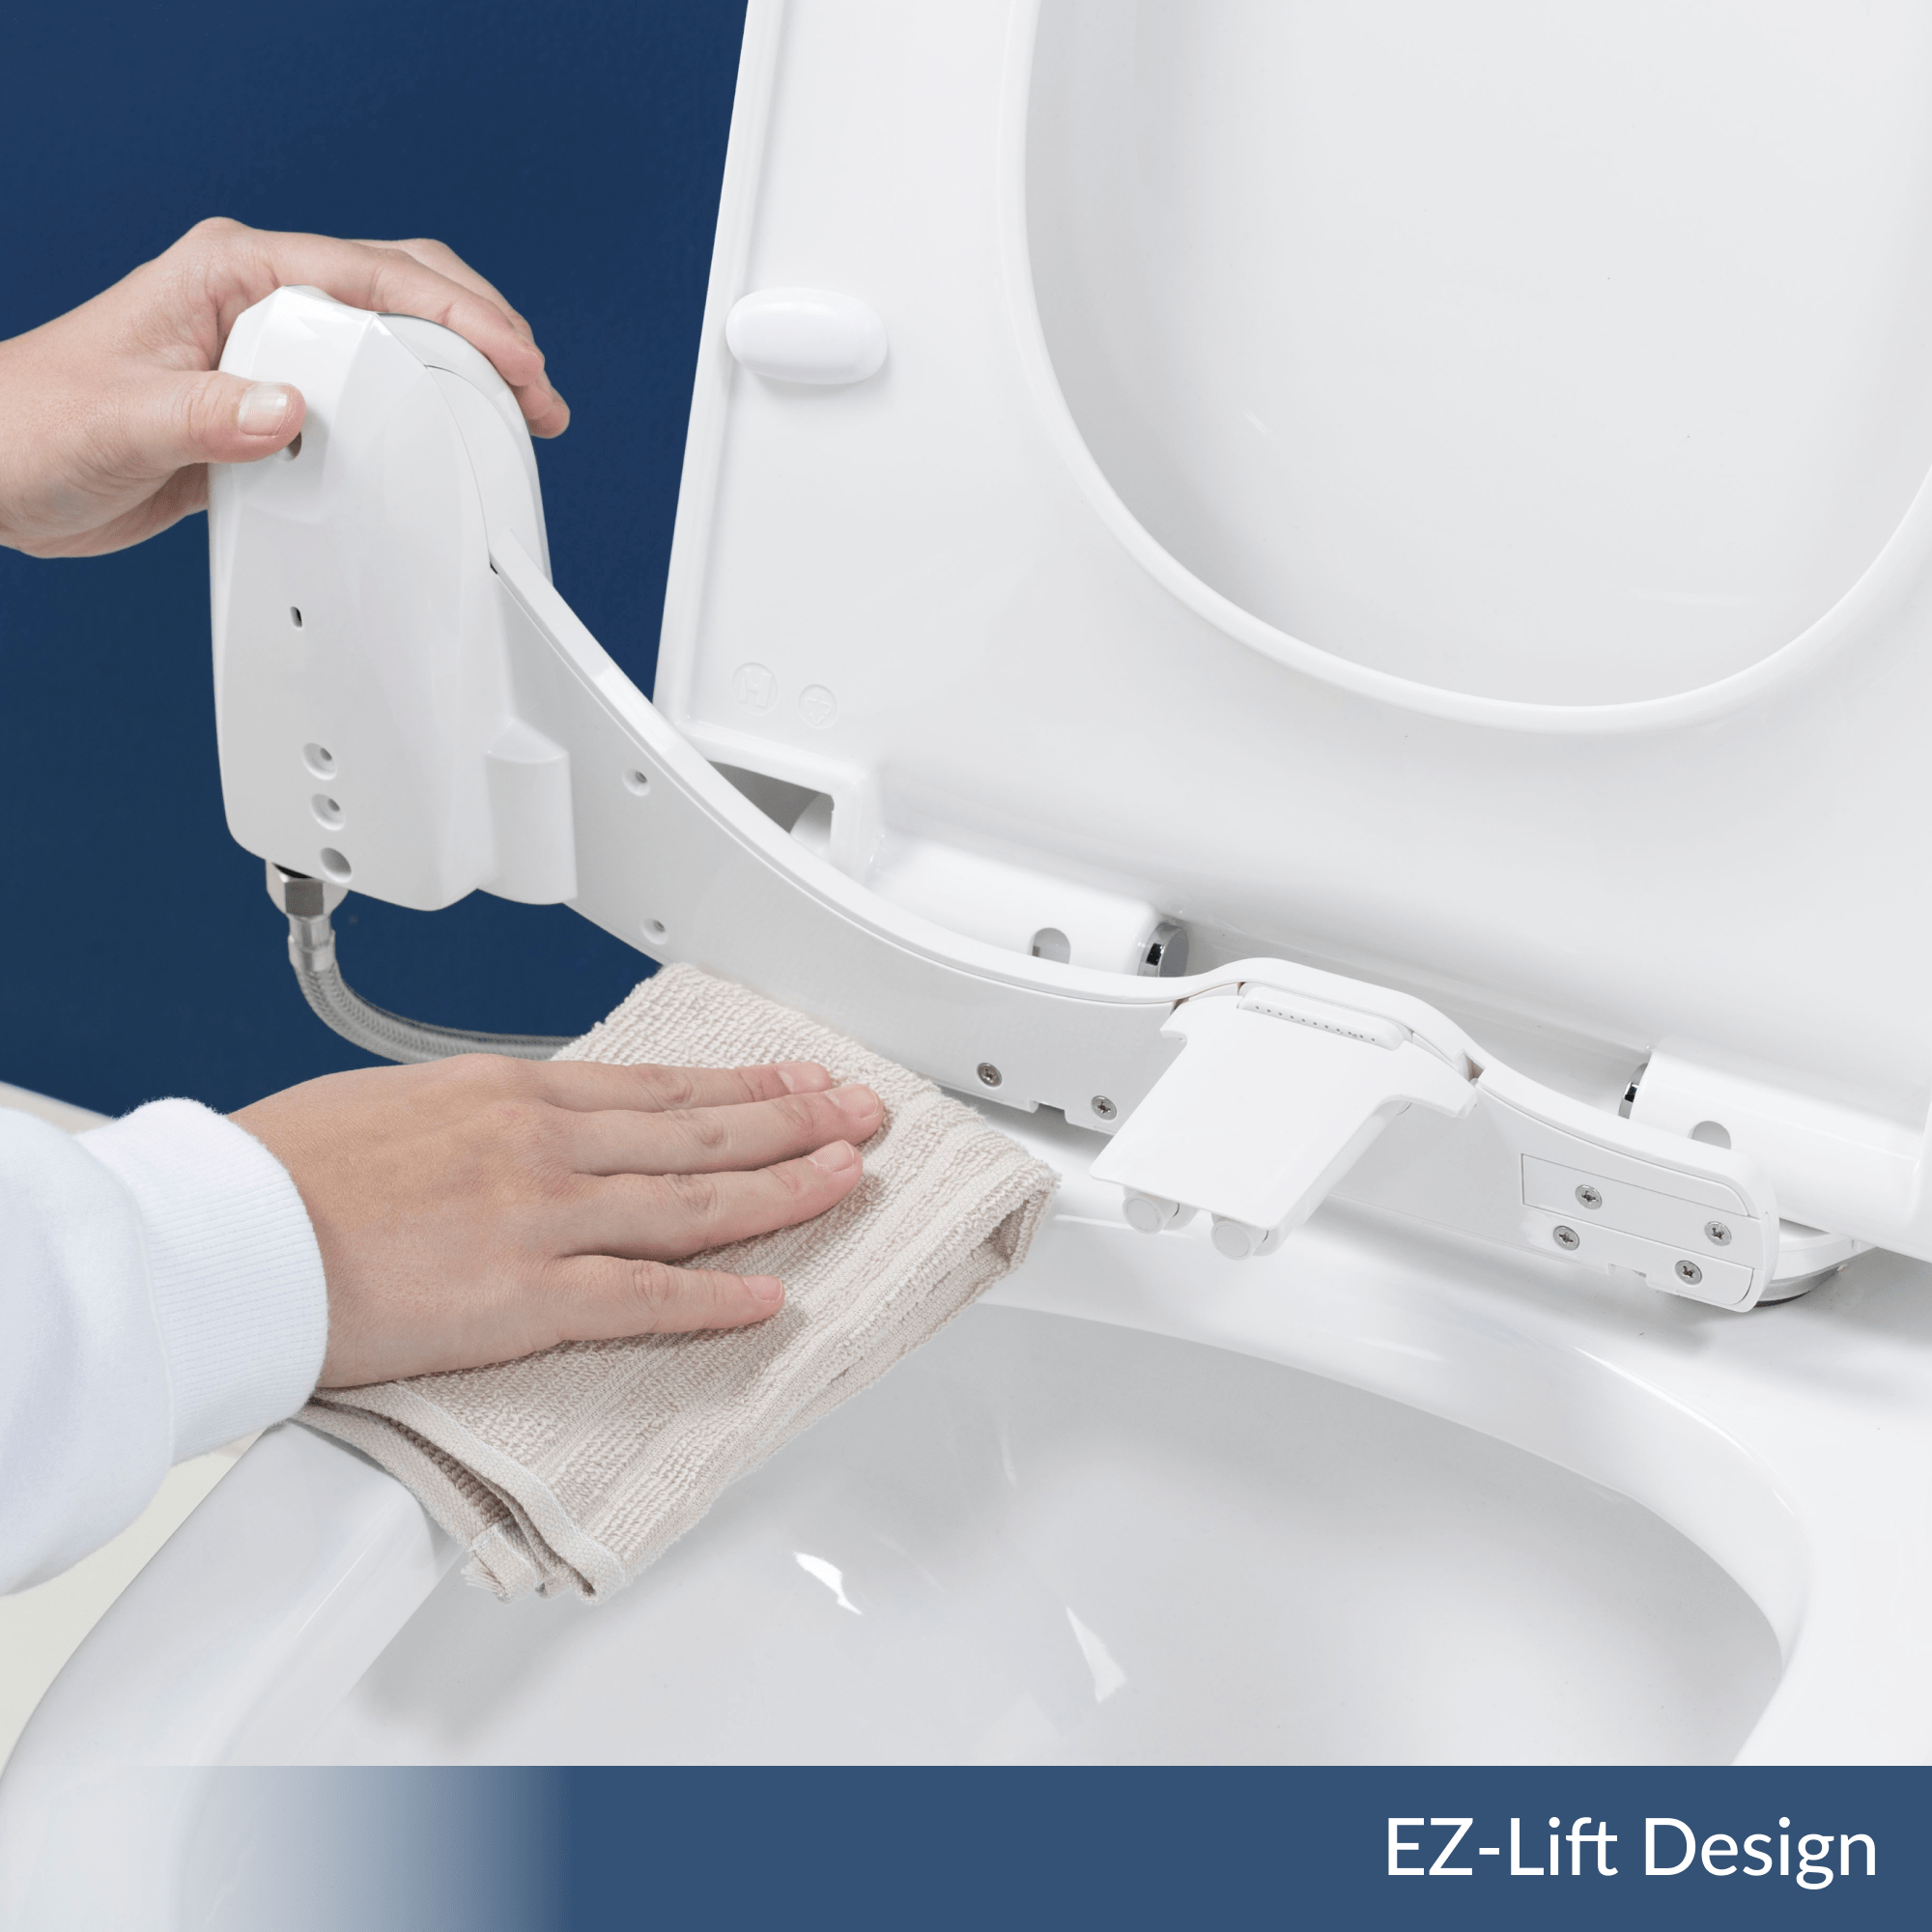 NEO 320 Plus: Imperfect Packaging - EZ-Lift feature of NEO Plus series allows user to lift up the bidet to clean the toilet bowl easily